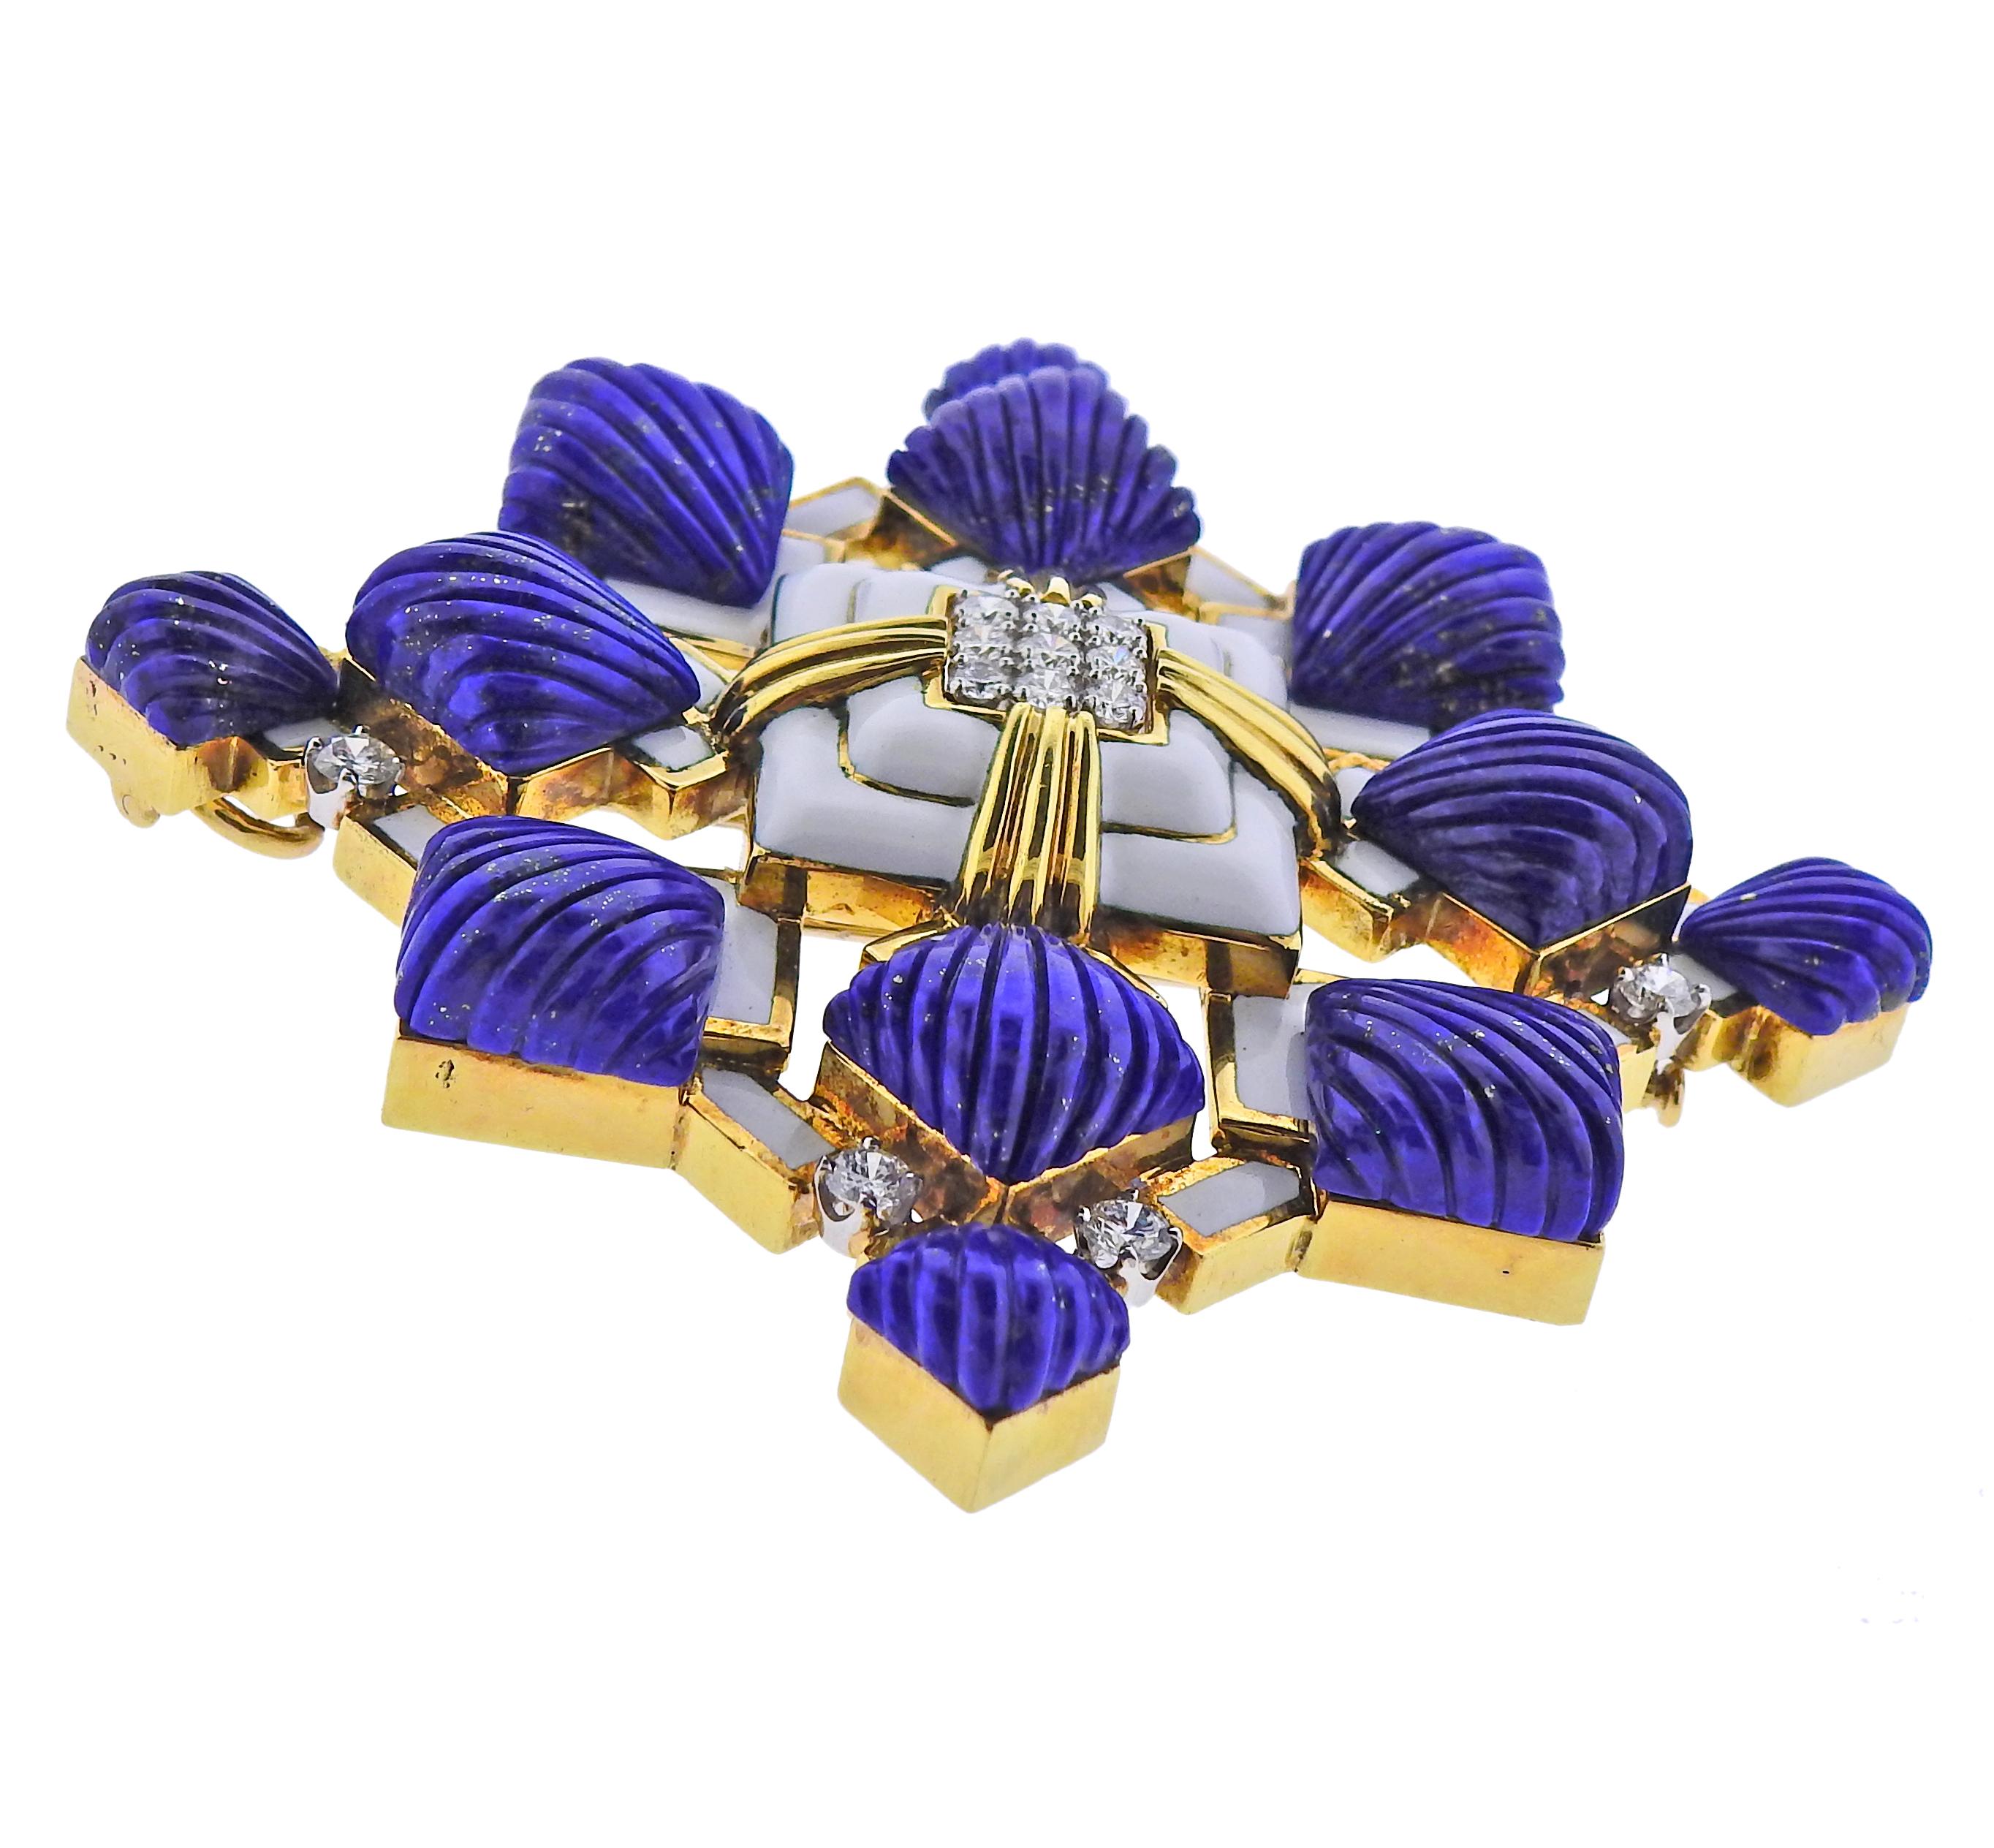 Large 18k gold and platinum Heraldic brooch pendant by David Webb, with fluted lapis, enamel and approx. 2.32cts in H/VS-Si1 diamonds. Pendant/brooch is 2.75